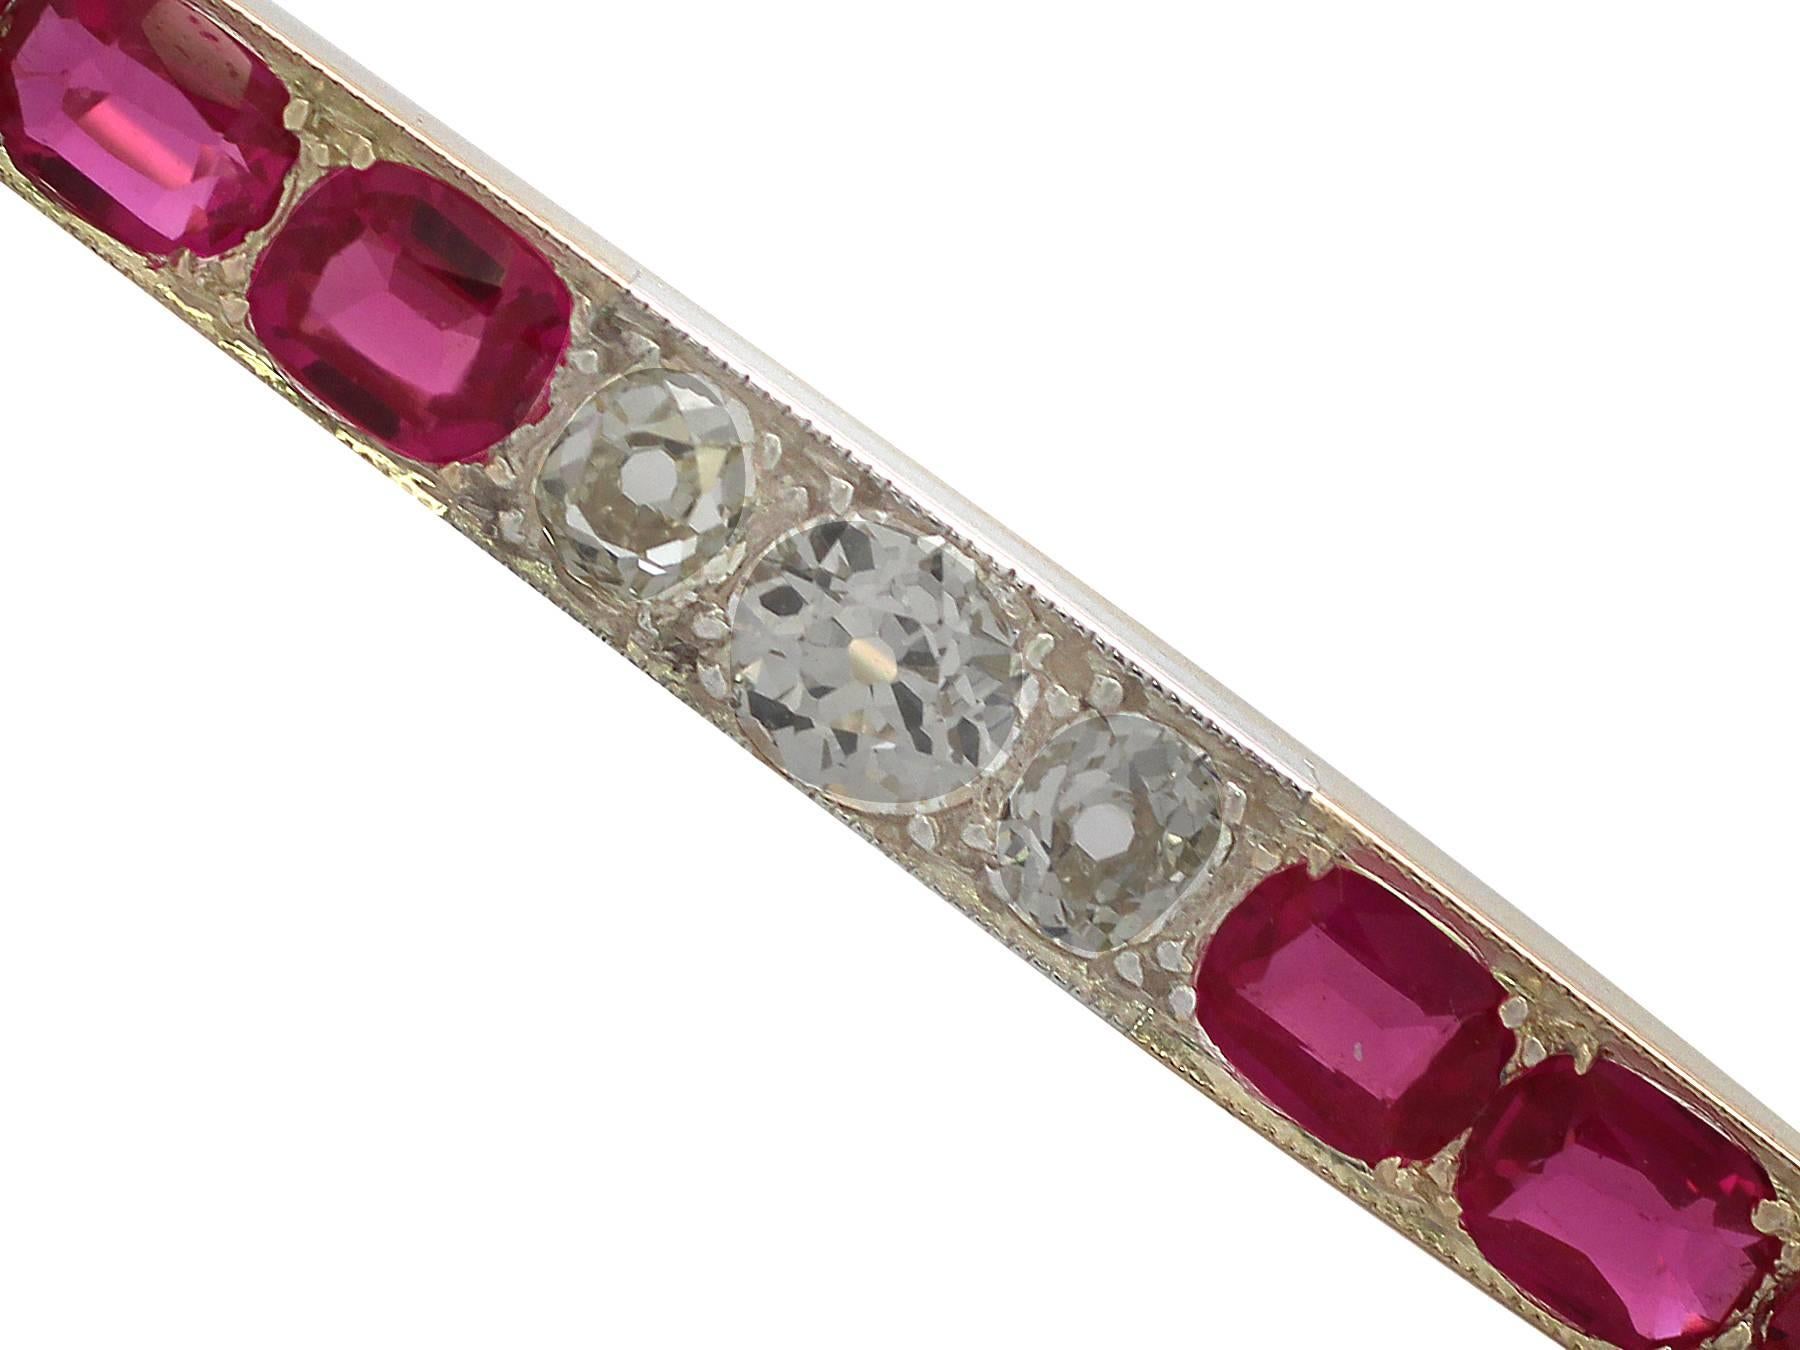 A fine and impressive antique 1.76 carat diamond and synthetic ruby, 18 karat yellow gold, silver set bar brooch; part of our diverse antique jewelry collection

This fine and impressive synthetic ruby and diamond bar brooch has been crafted in 18k